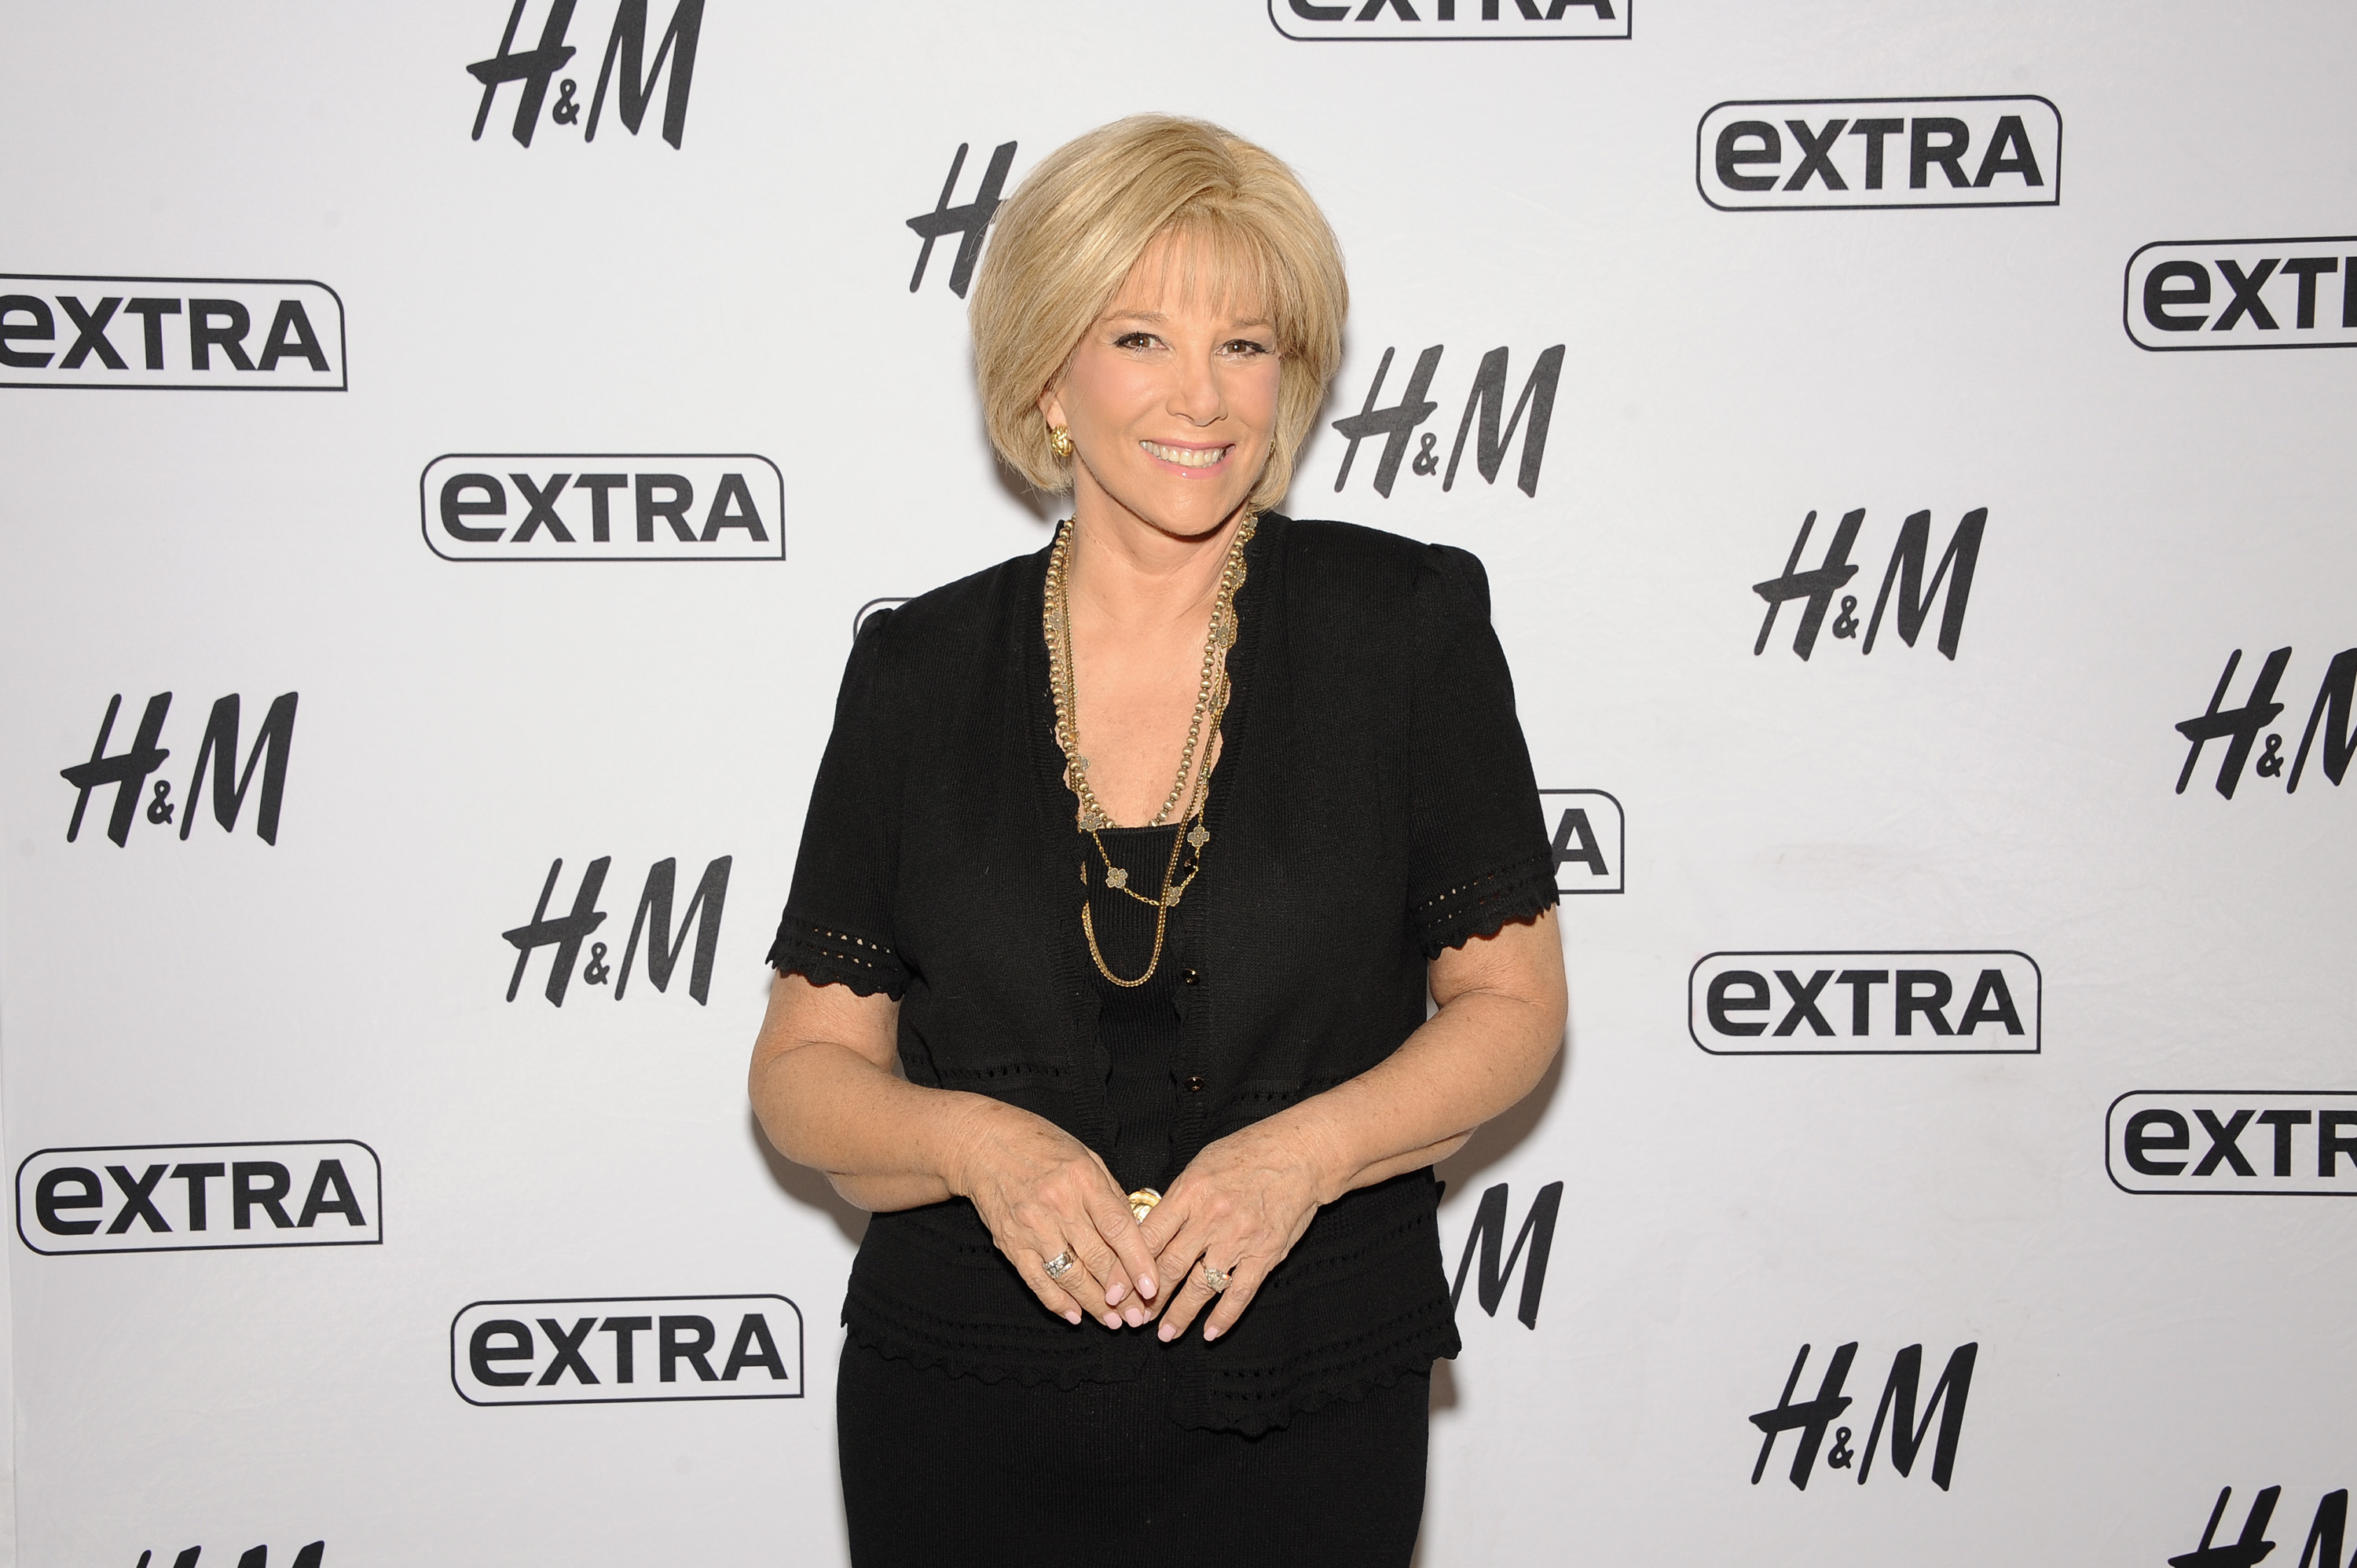 Joan Lunden visits "Extra" at their studios at H&M in Times Square in New York City on June 10, 2015. | Source: Getty Images